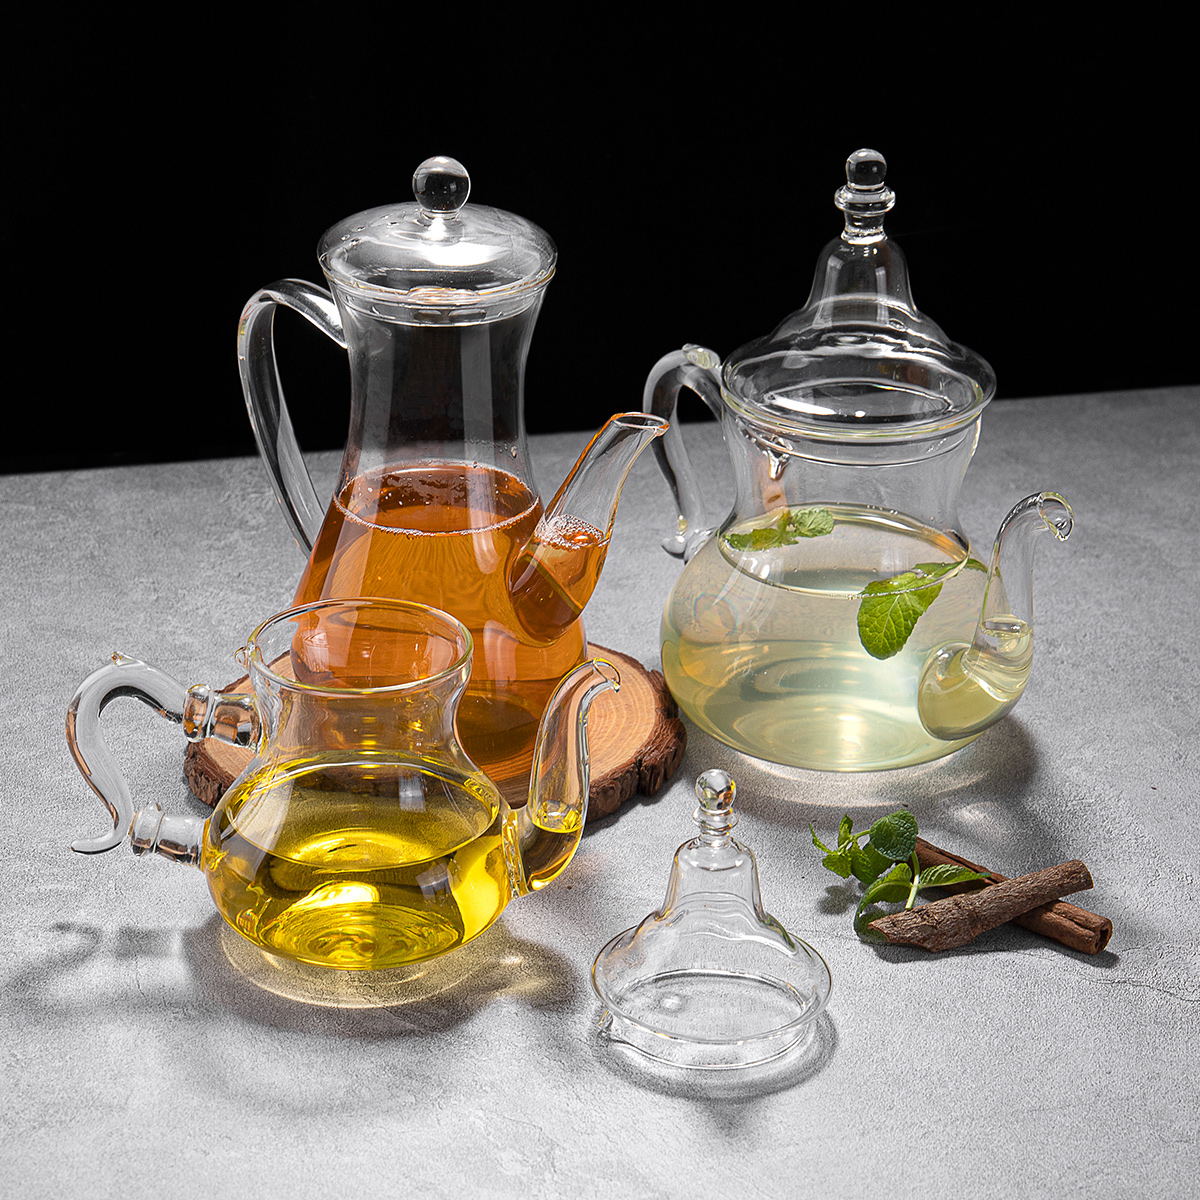 JINGHUANG OEMM/ODM aramoro China Factory Wholesale Clear Handmade Glass bloom Teapot with glass infuser